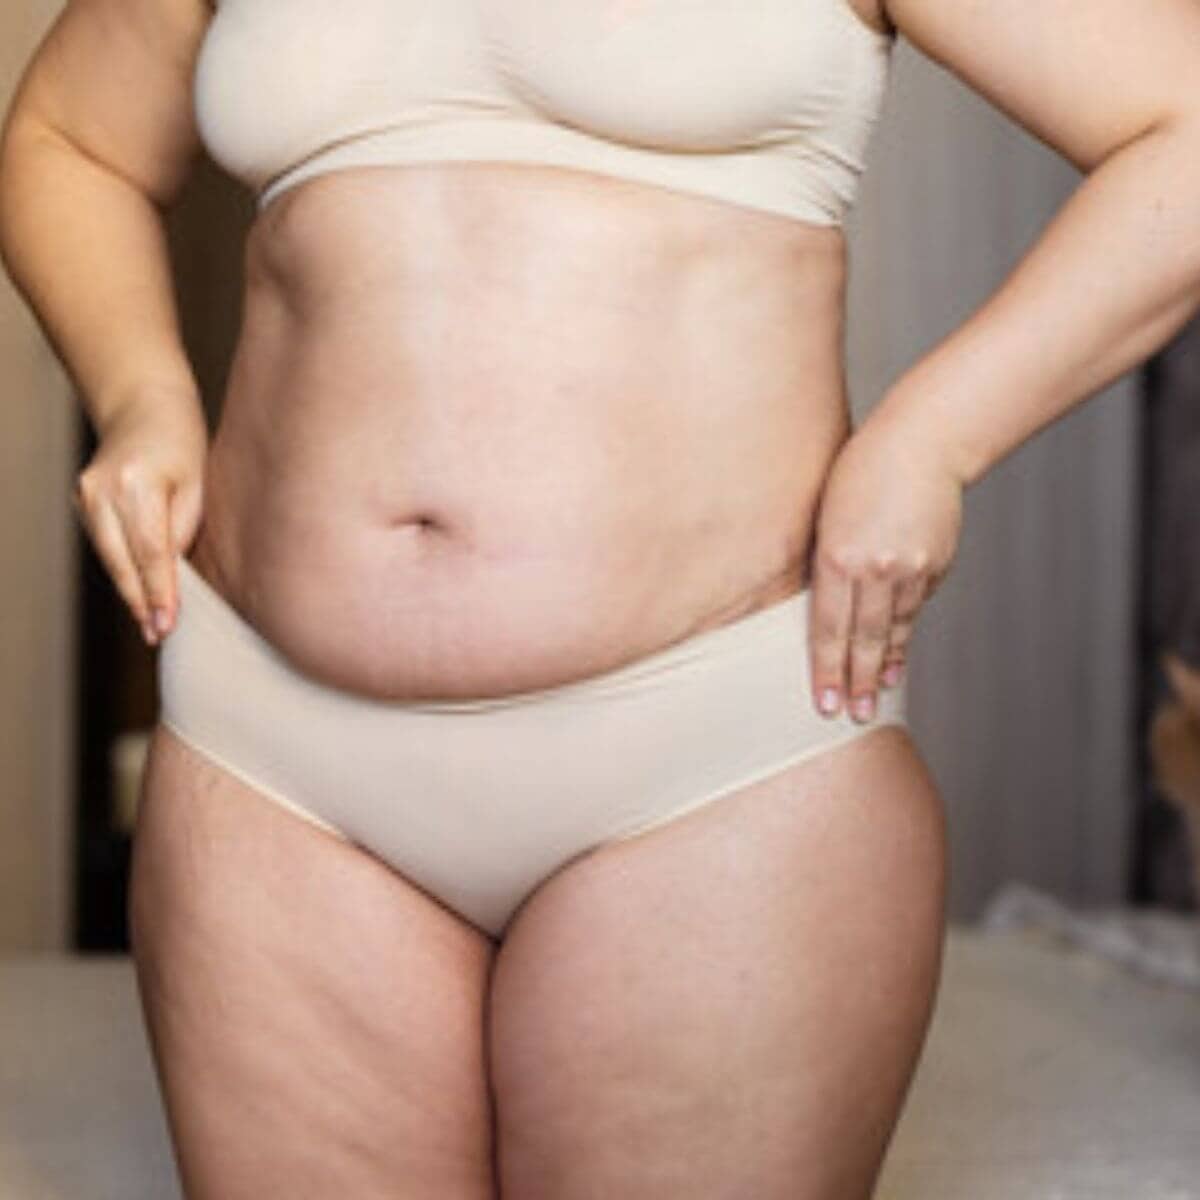 A woman is standing in her bedroom wearing a tan colored bra and panty set with her hands on the waist of the panties